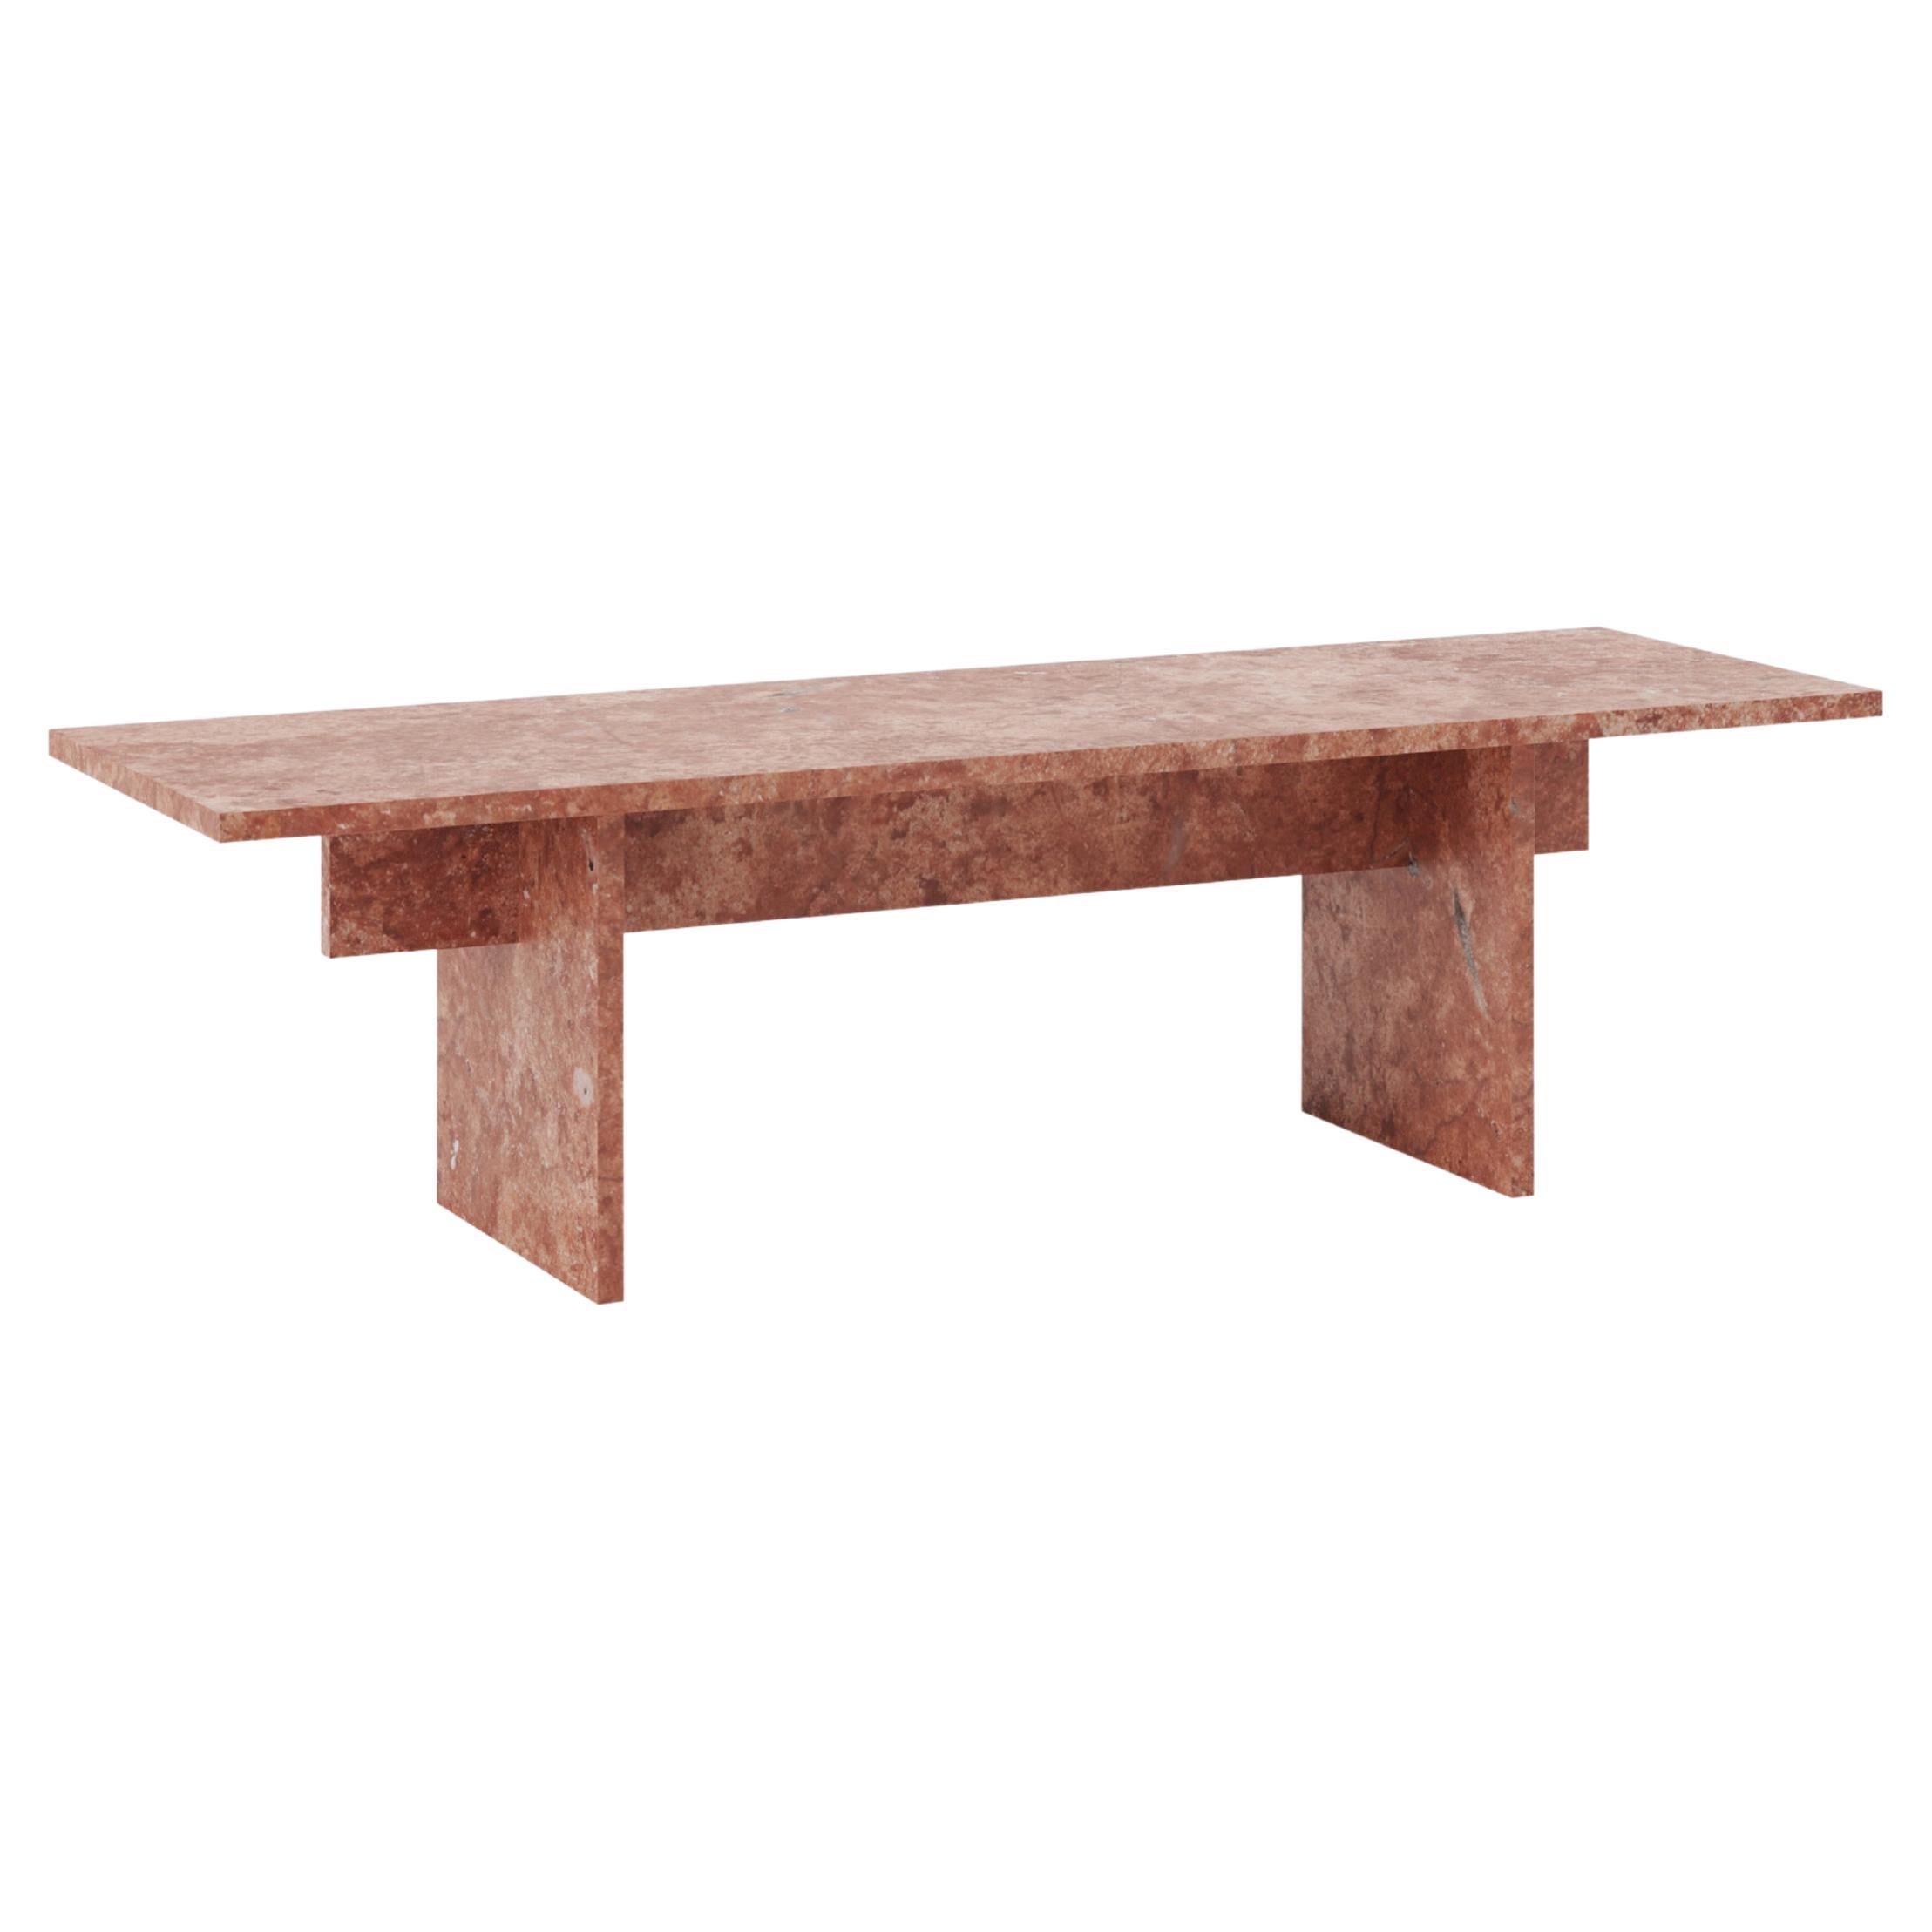 Vondel Coffee Table/Bench Handcrafted in Honed Red Travertine